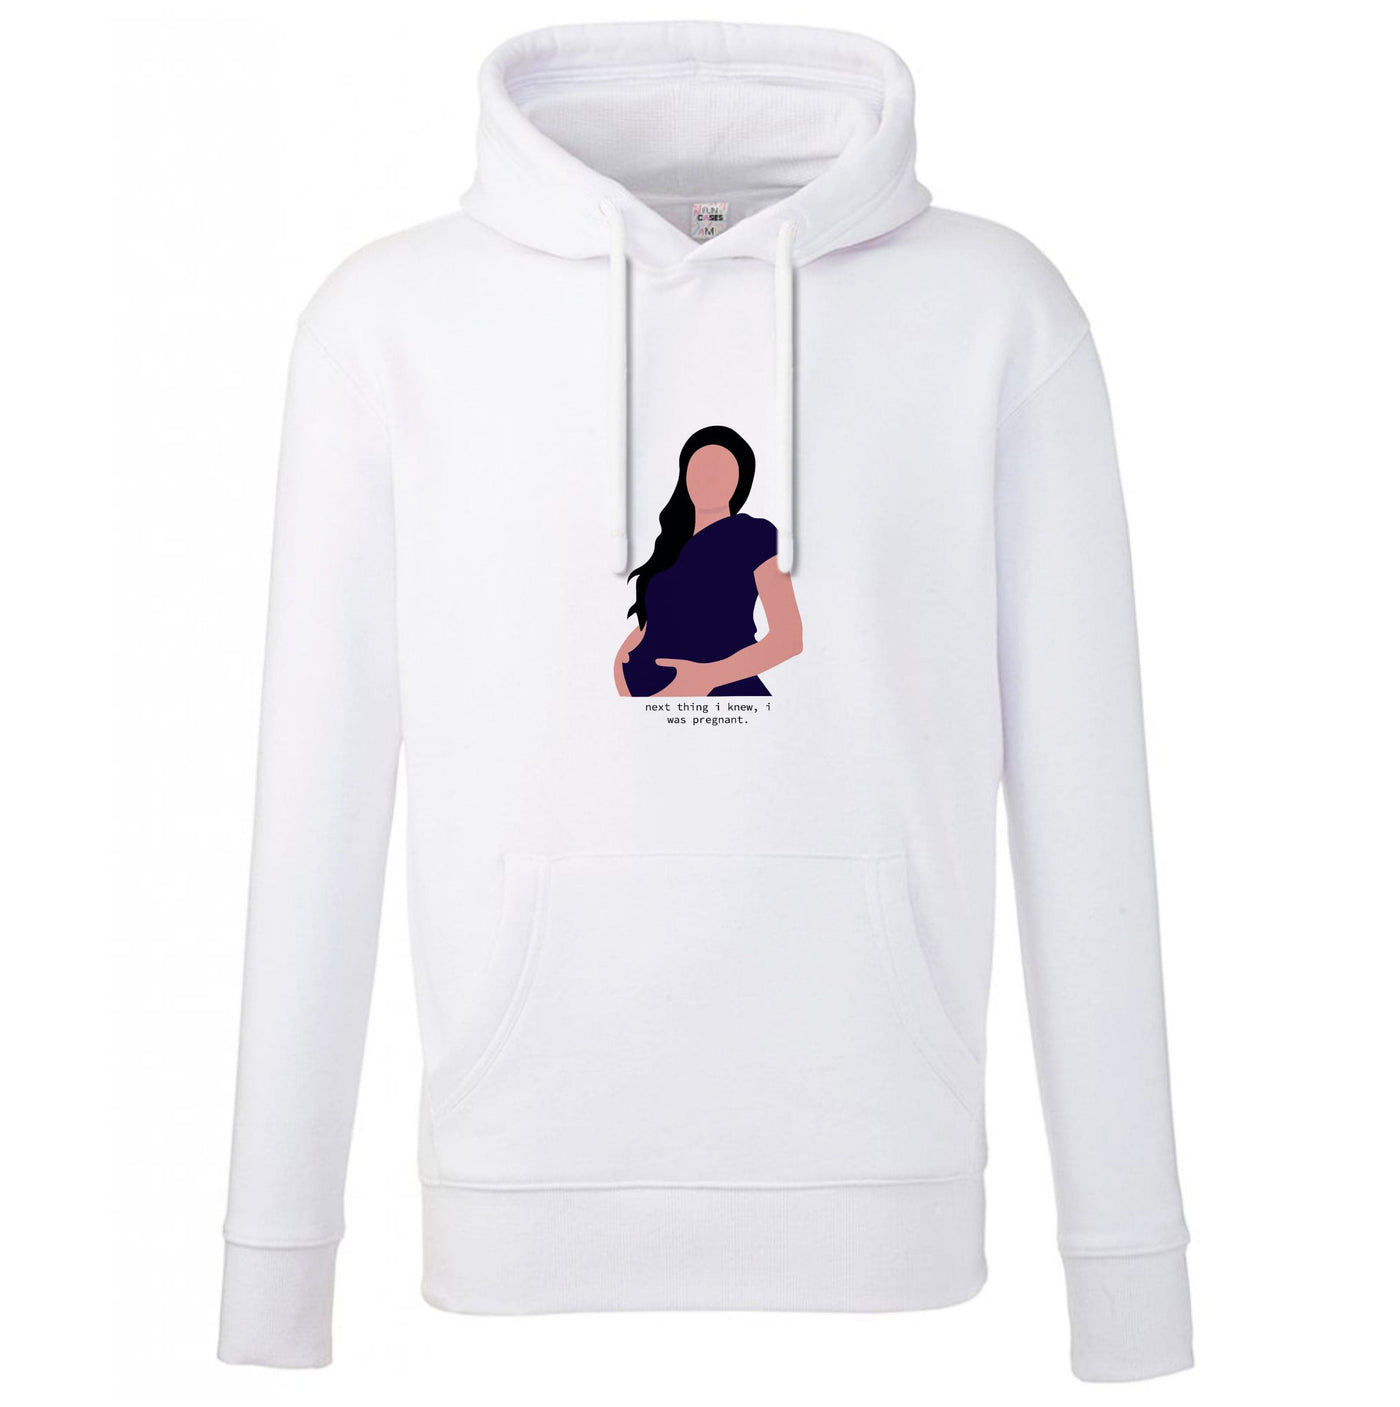 Next thing I knew, I was pregnant - Kylie Jenner Hoodie